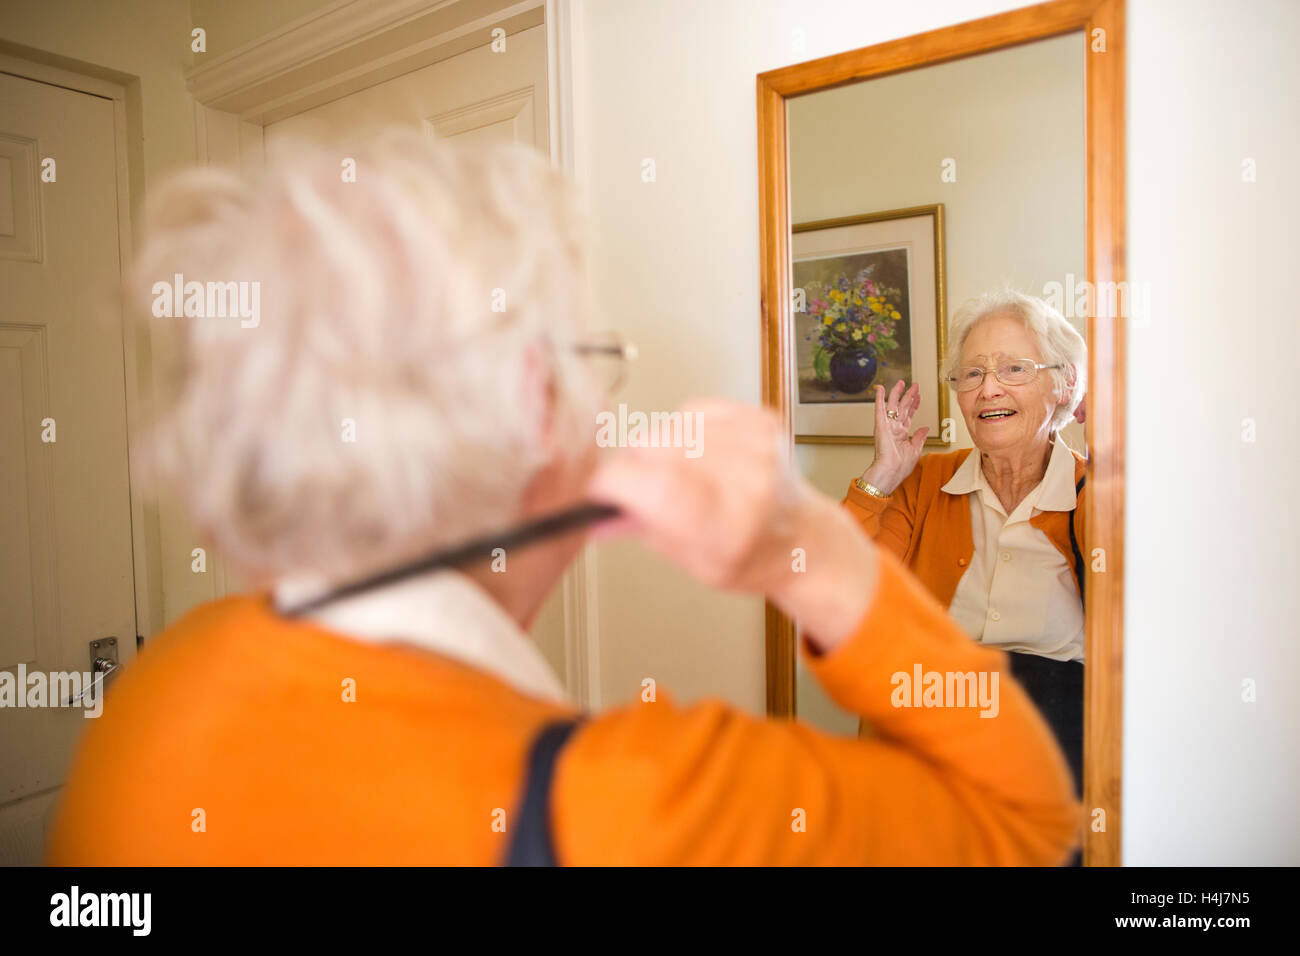 Elderly lady combing her hair in mirror at home, UK Stock Photo